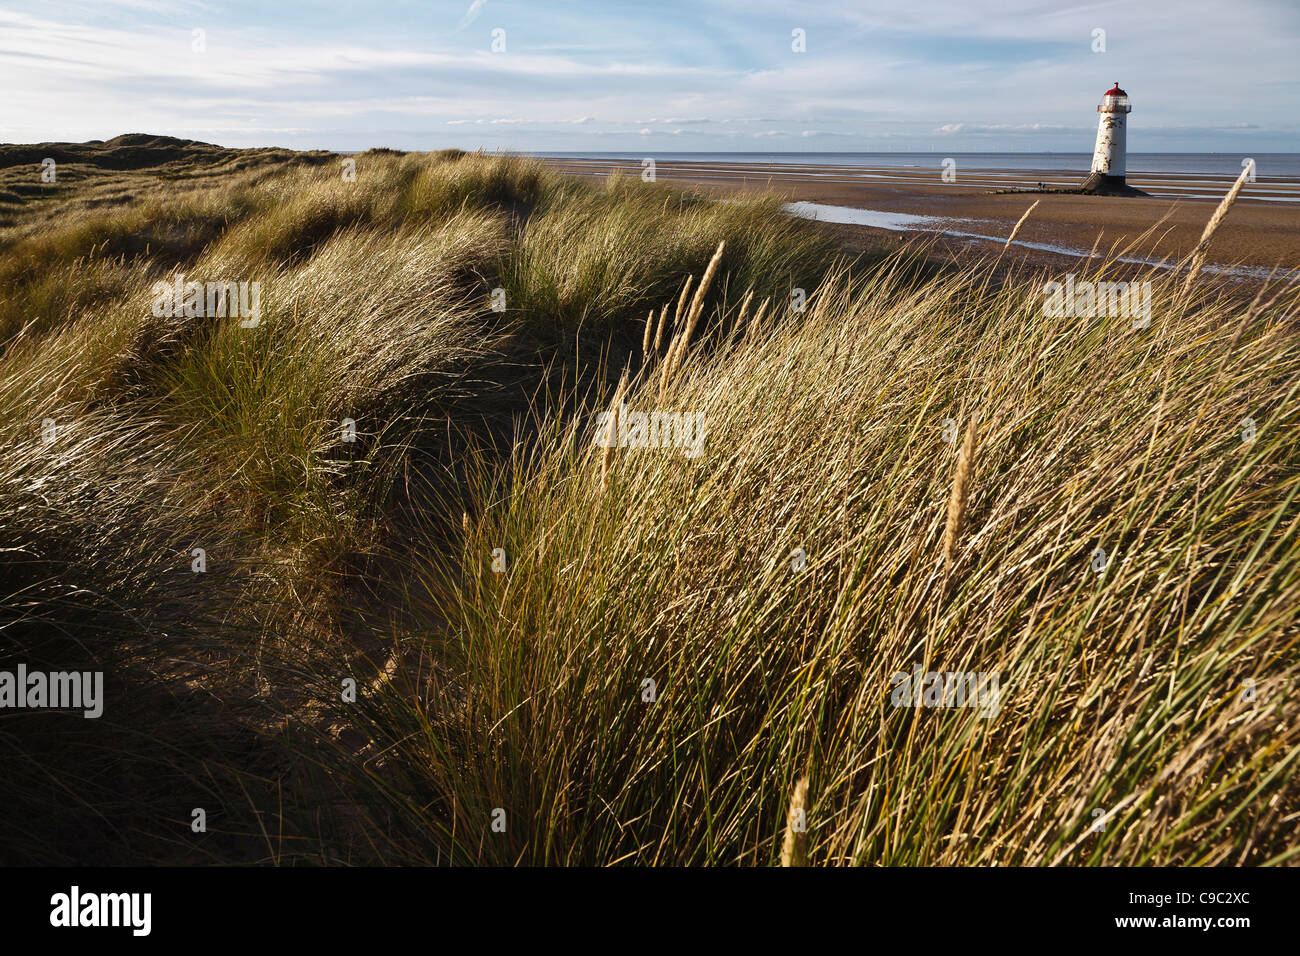 Sand dunes and the Point of Ayr Lighthouse, Talacre Beach, Flintshire, Wales Stock Photo